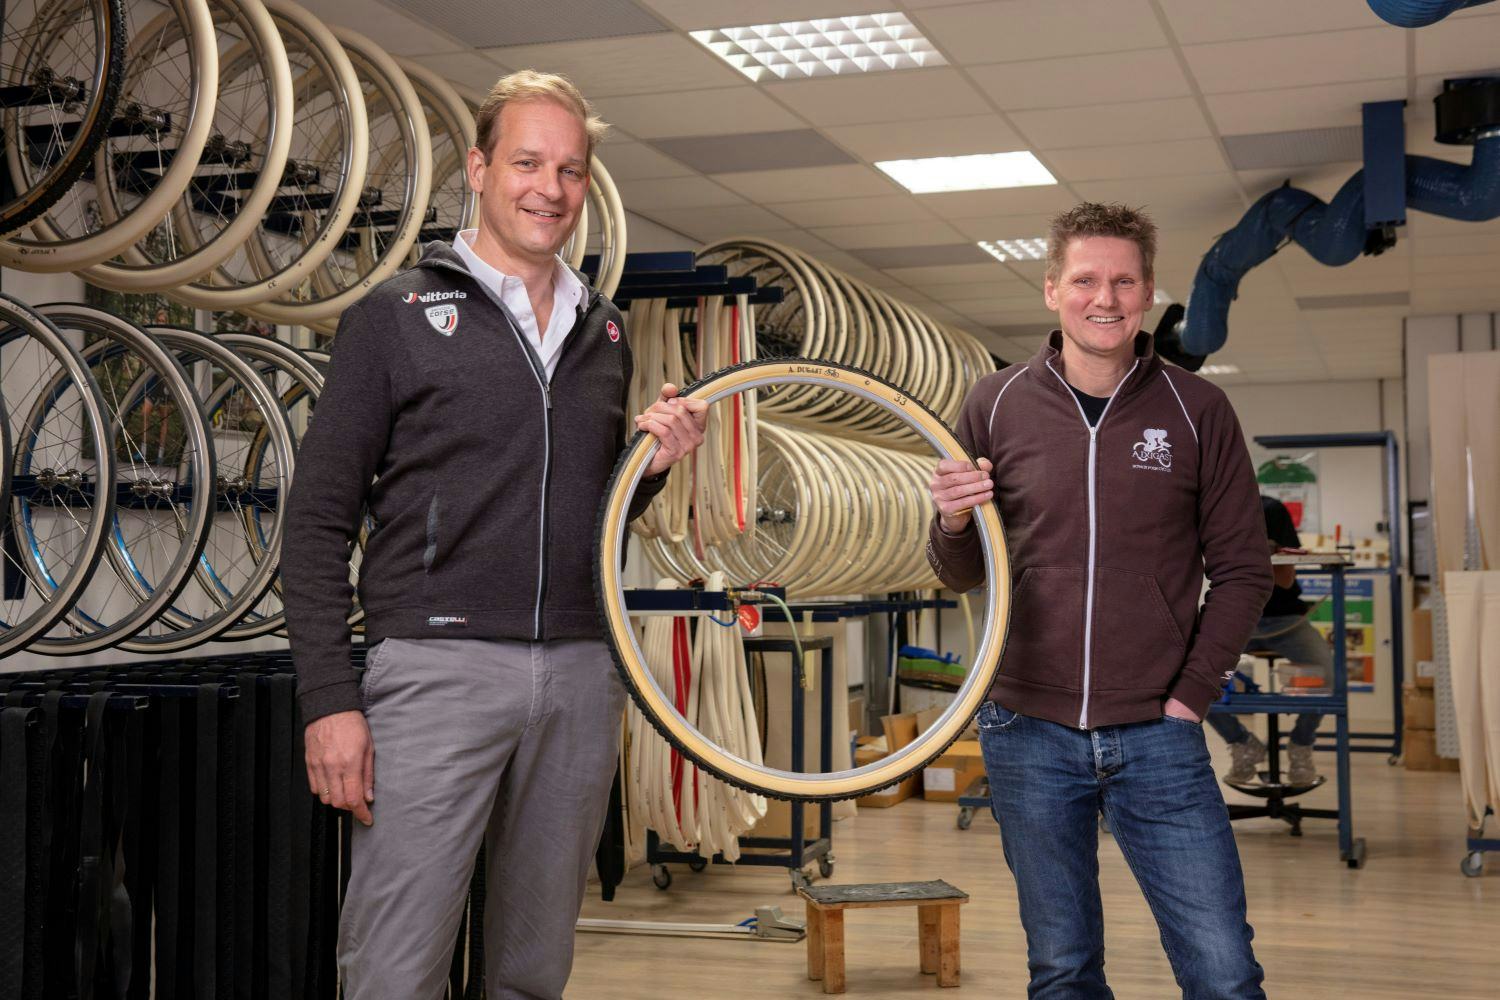 Vittoria Group President and CEO Stijn Vriends (l.) and Managing Director Richard Nieuwhuis of A. Dugast. – Photo Vittoria 